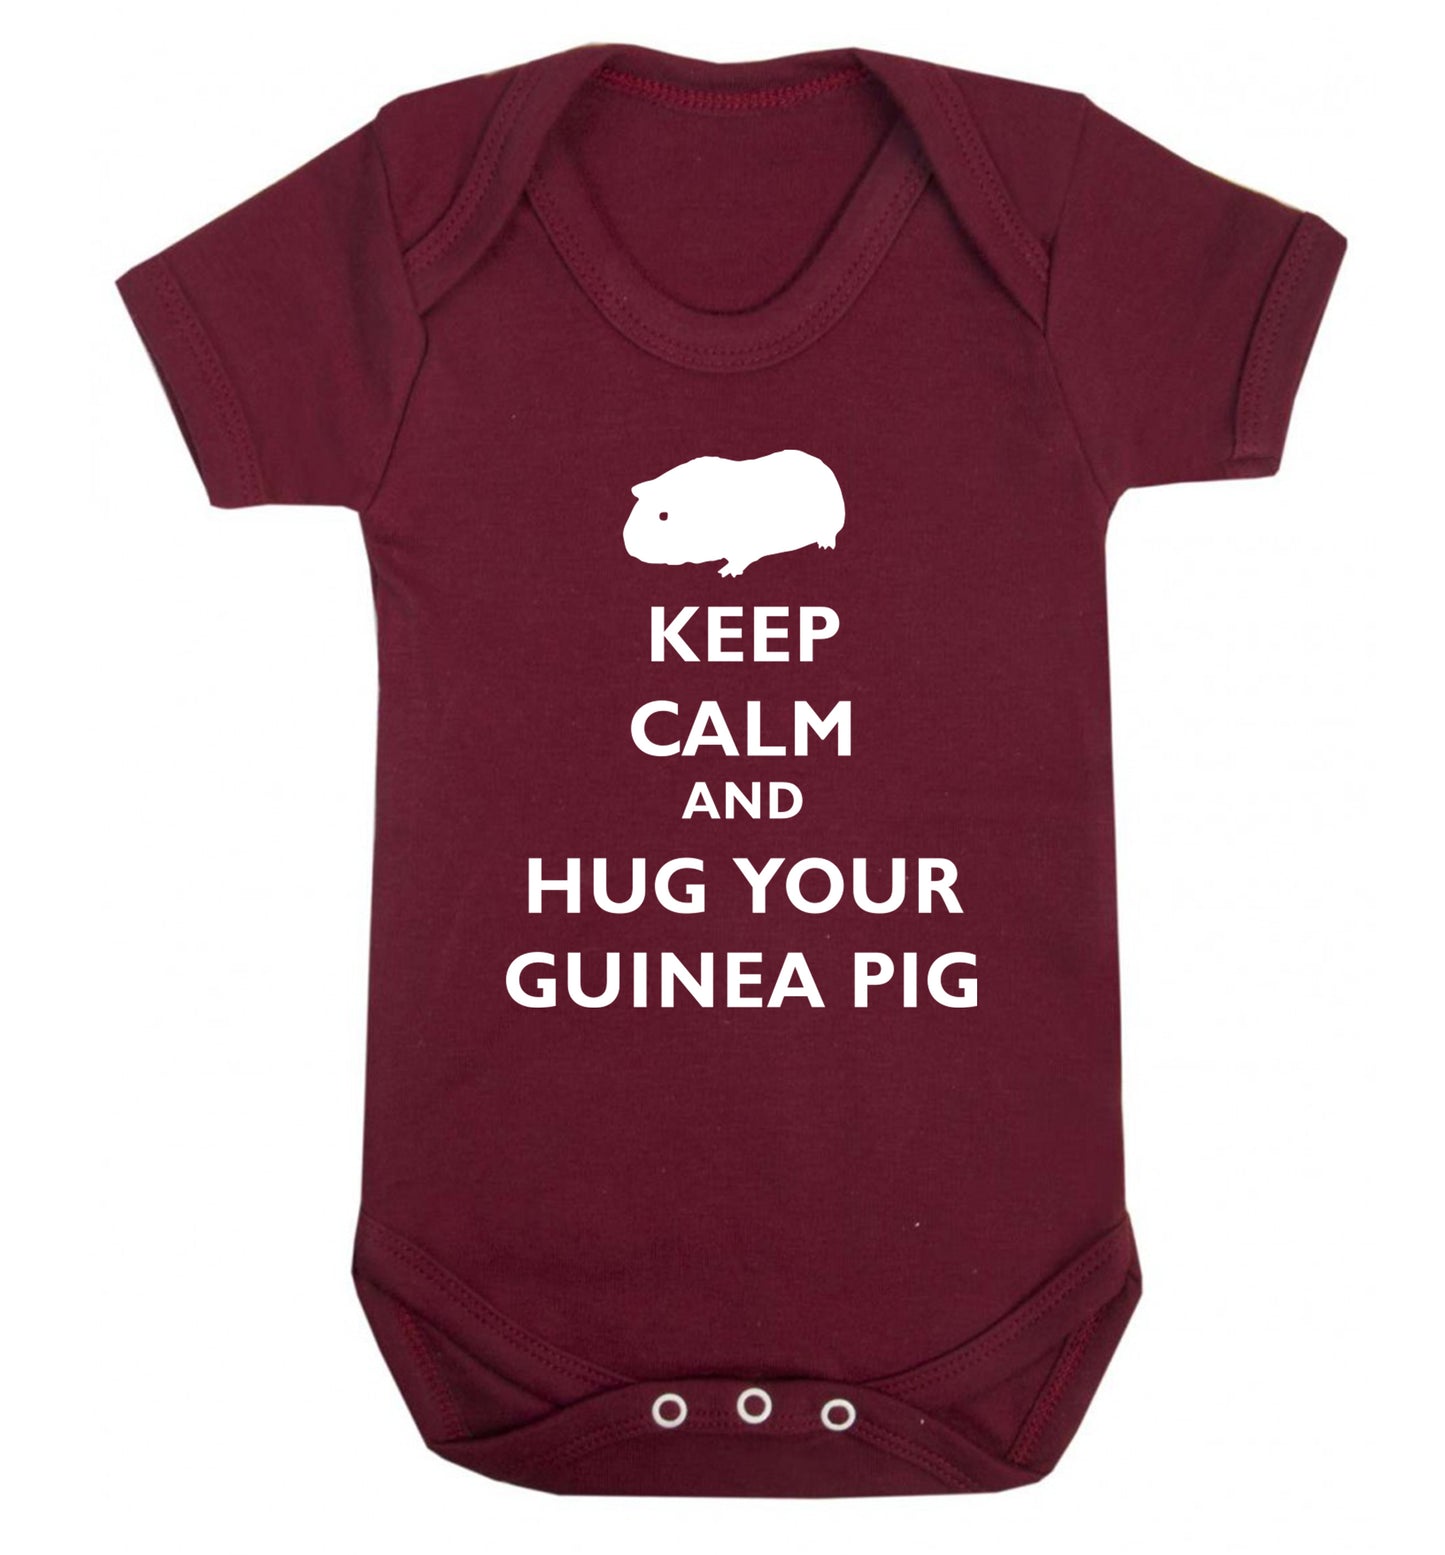 Keep calm and hug your guineapig Baby Vest maroon 18-24 months